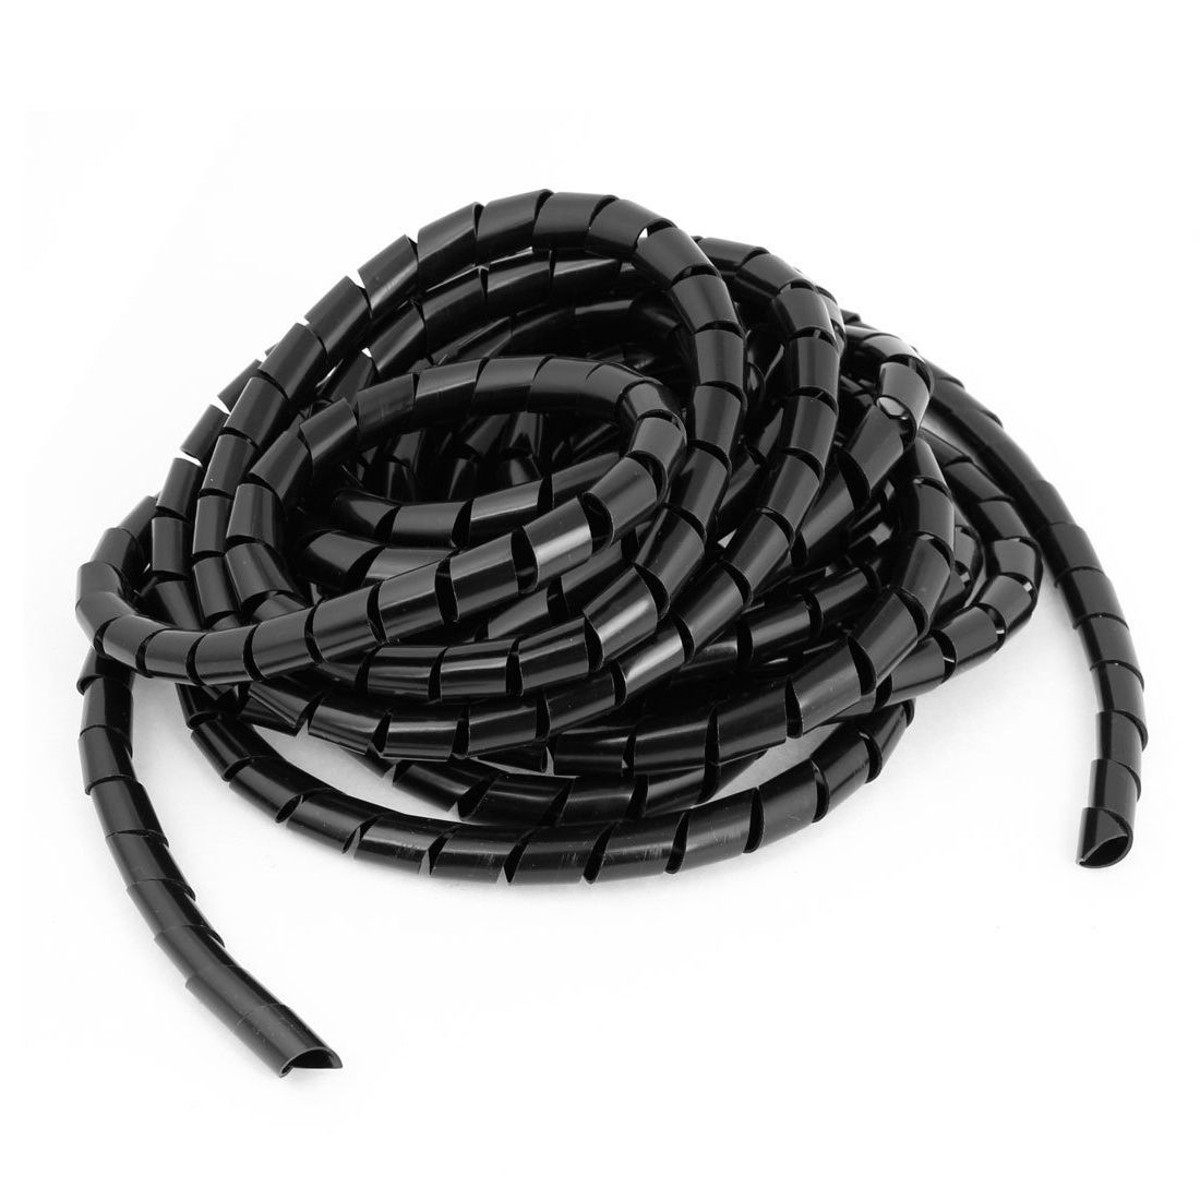 Black-Spiral-Polyethylene-Cable-Electrical-Wire-Wrap-Tube-Computer-Manage-Cord-1089427-4